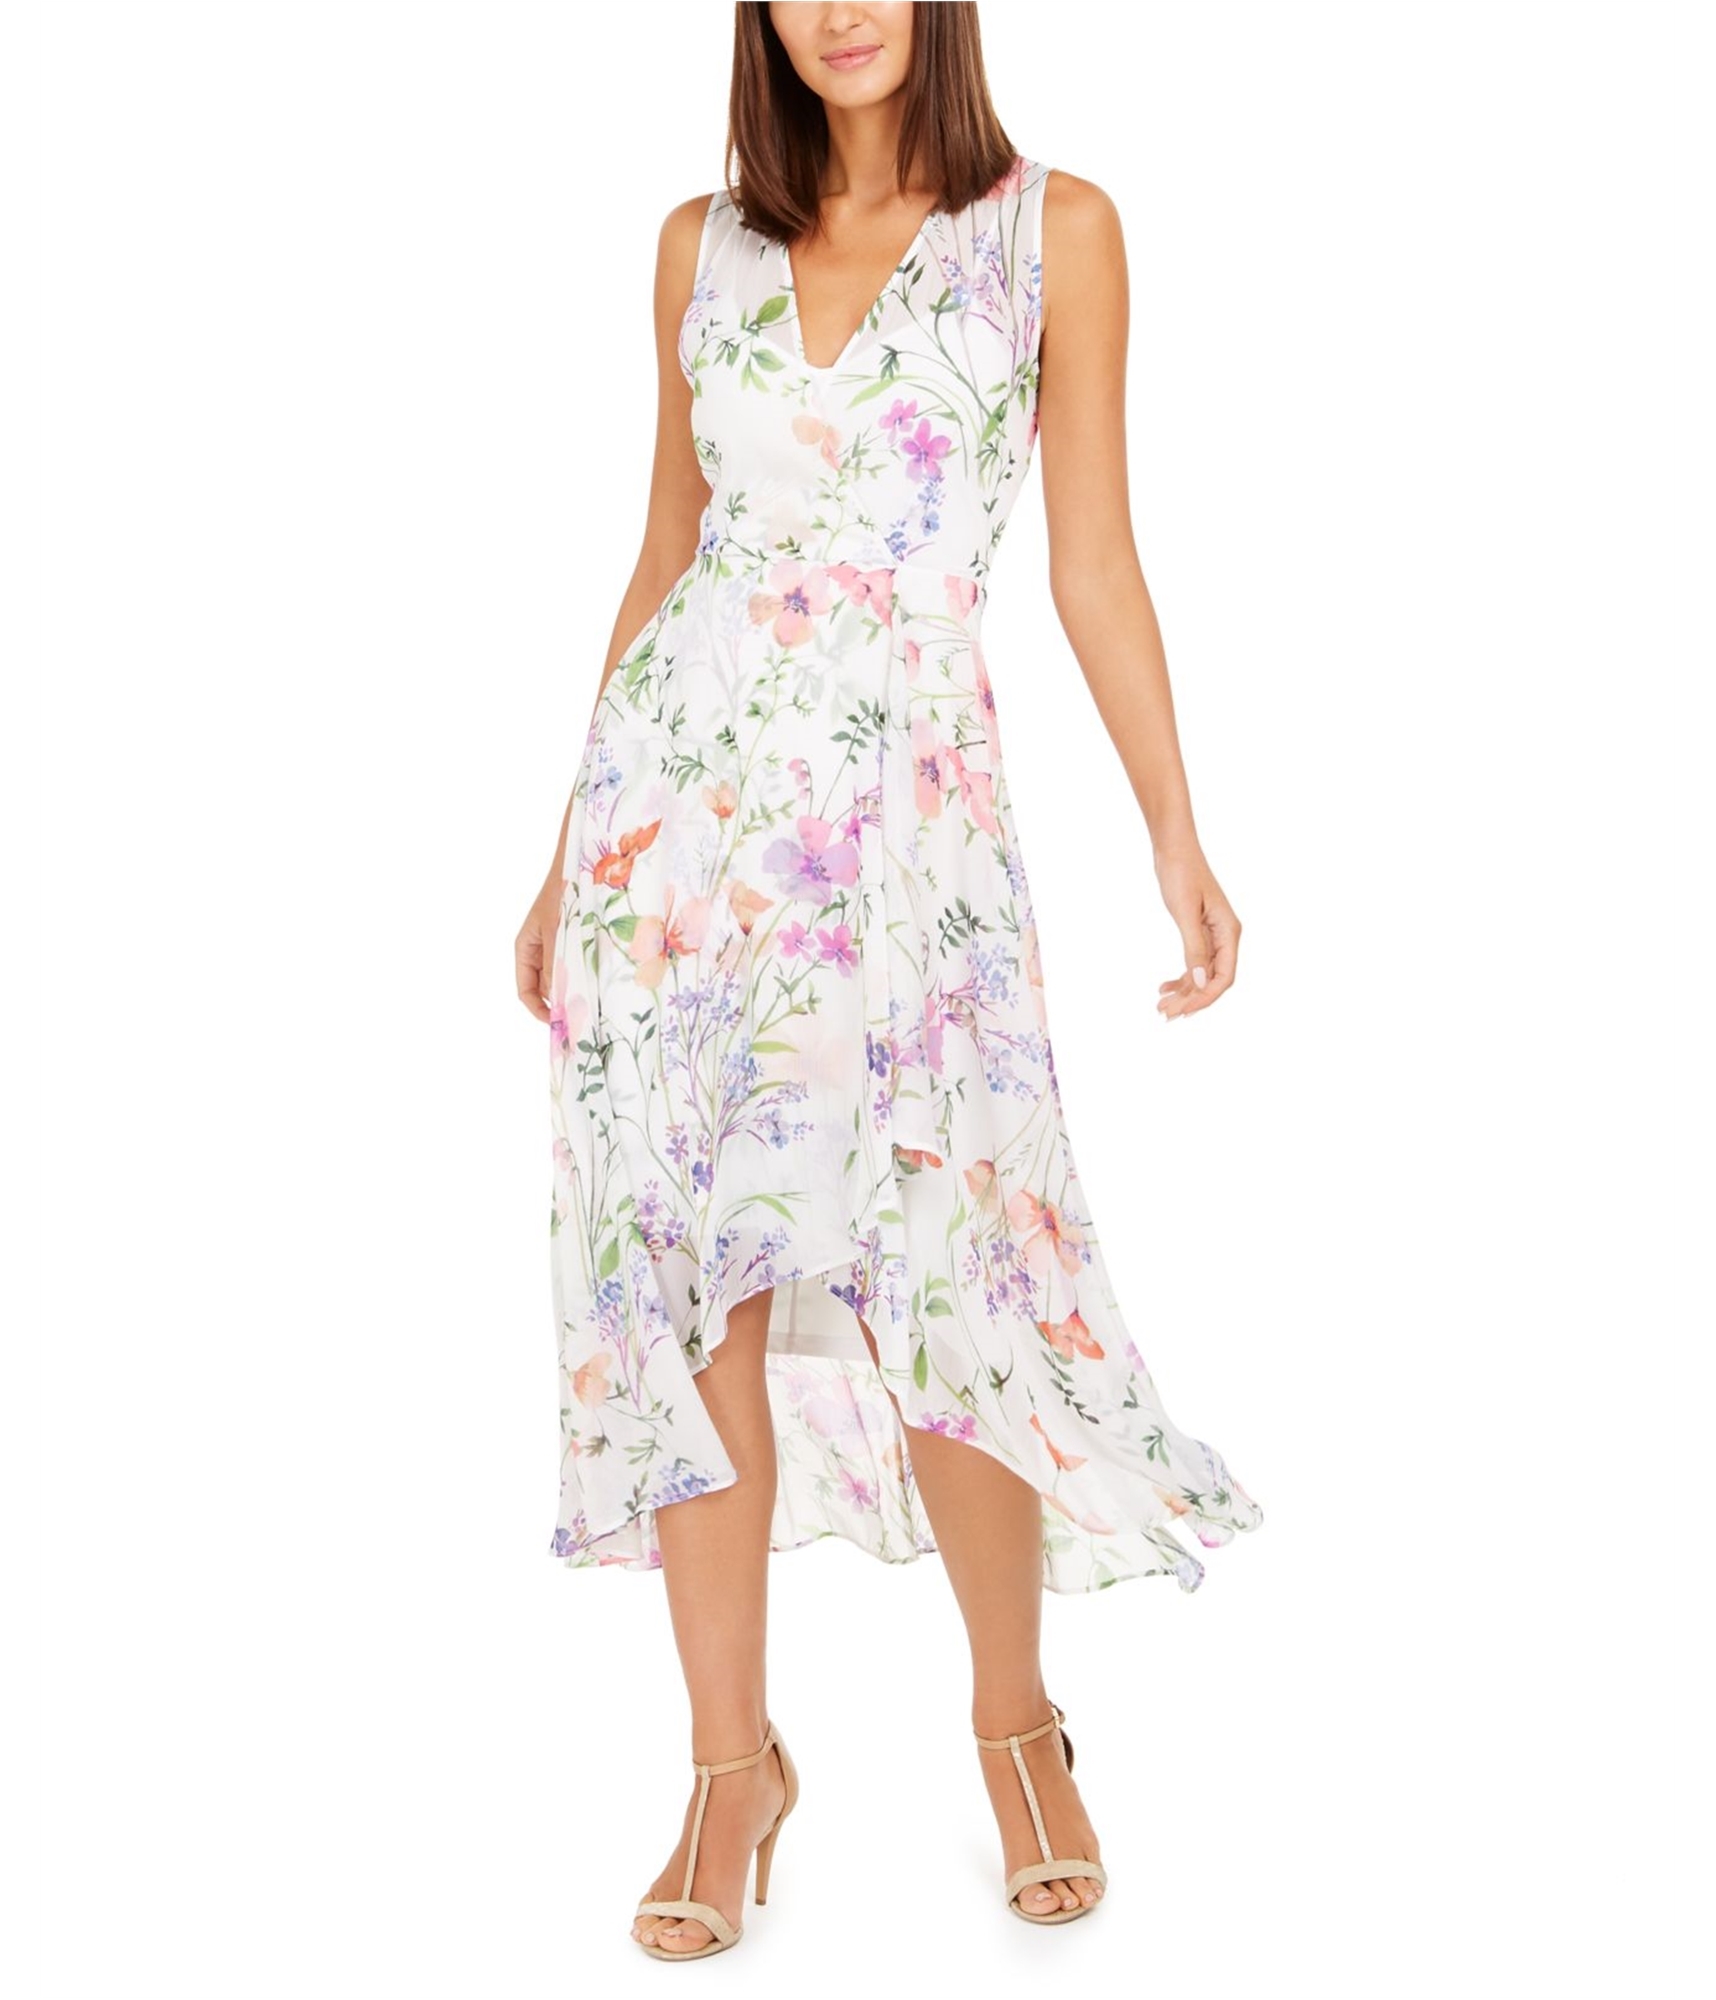 Buy a Calvin Klein Womens Floral High-Low Dress, TW1 | Tagsweekly